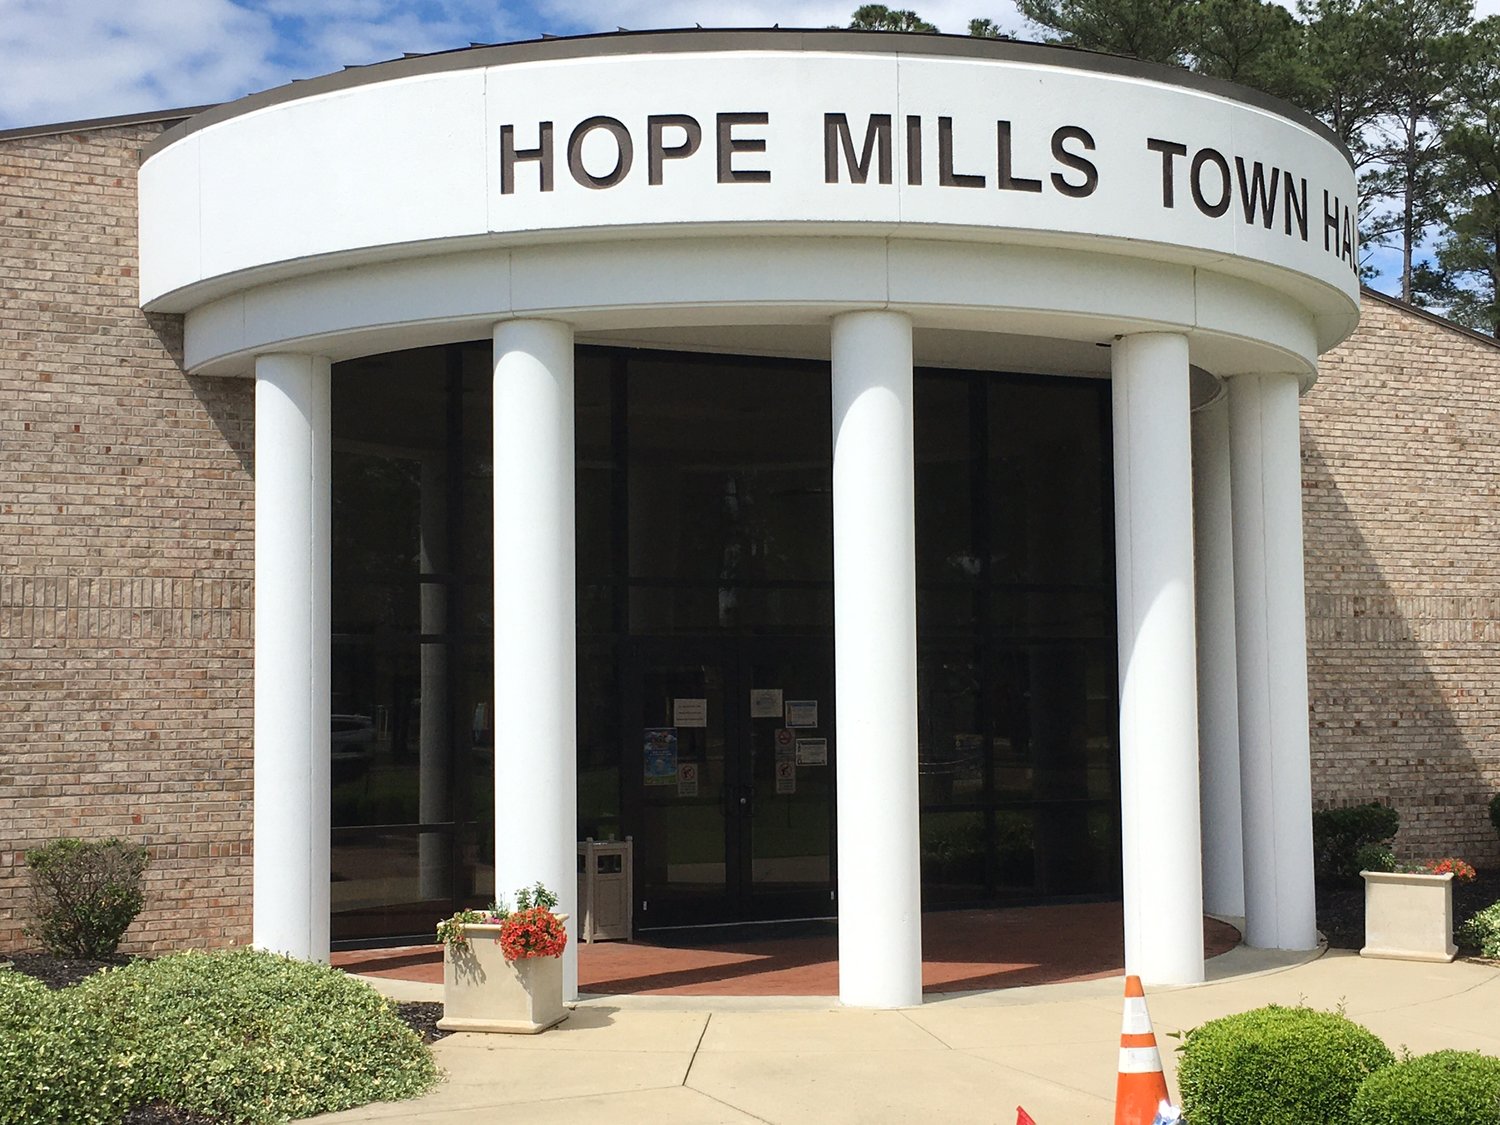 The Hope Mills Board of Commissioners on Monday night voted 4-1 to delay a vote on an apartment complex proposed for Elk Road.